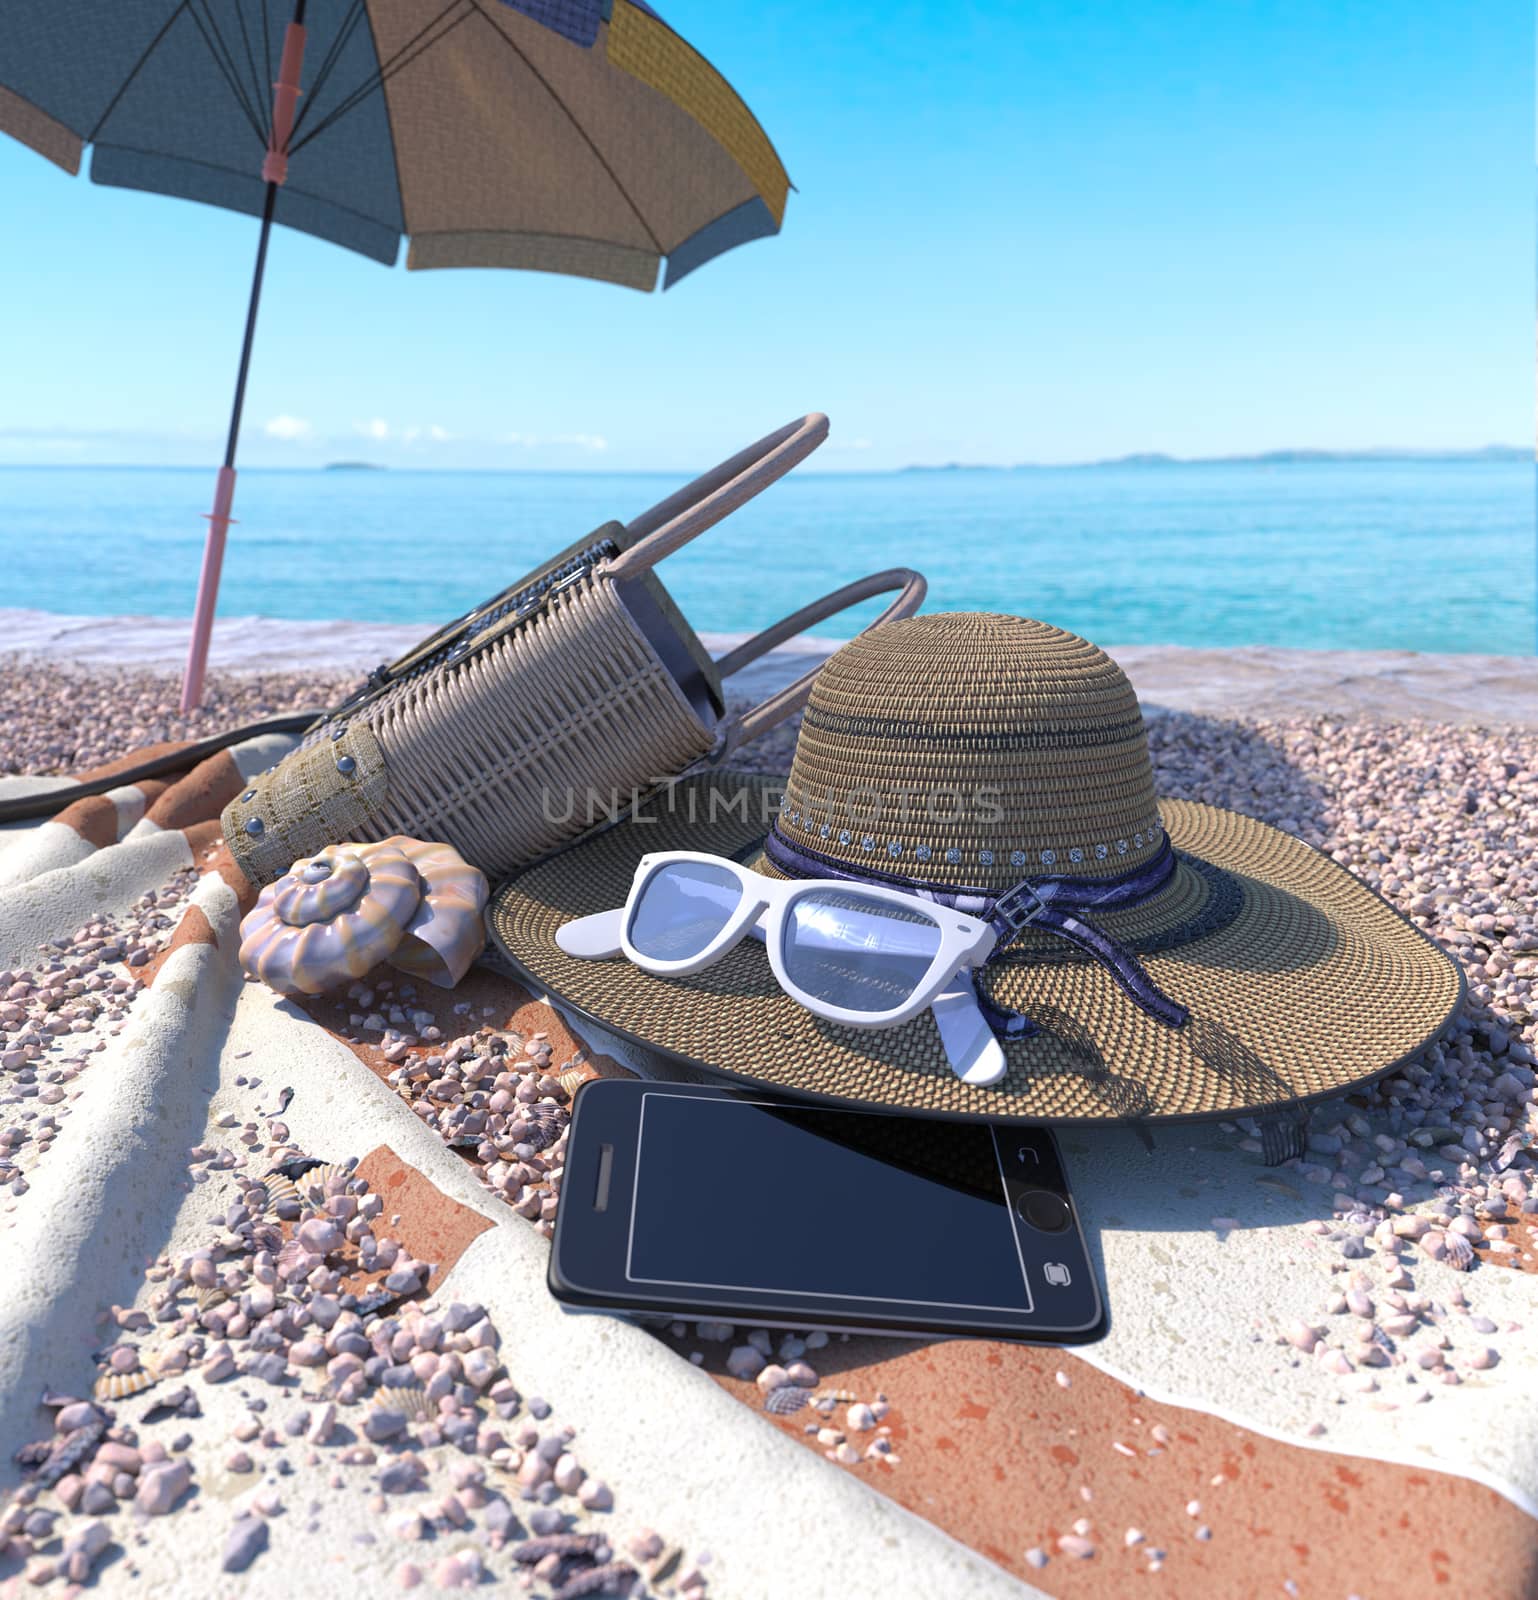 relaxing vacation concept background with seashell, umbrella and beach accessories